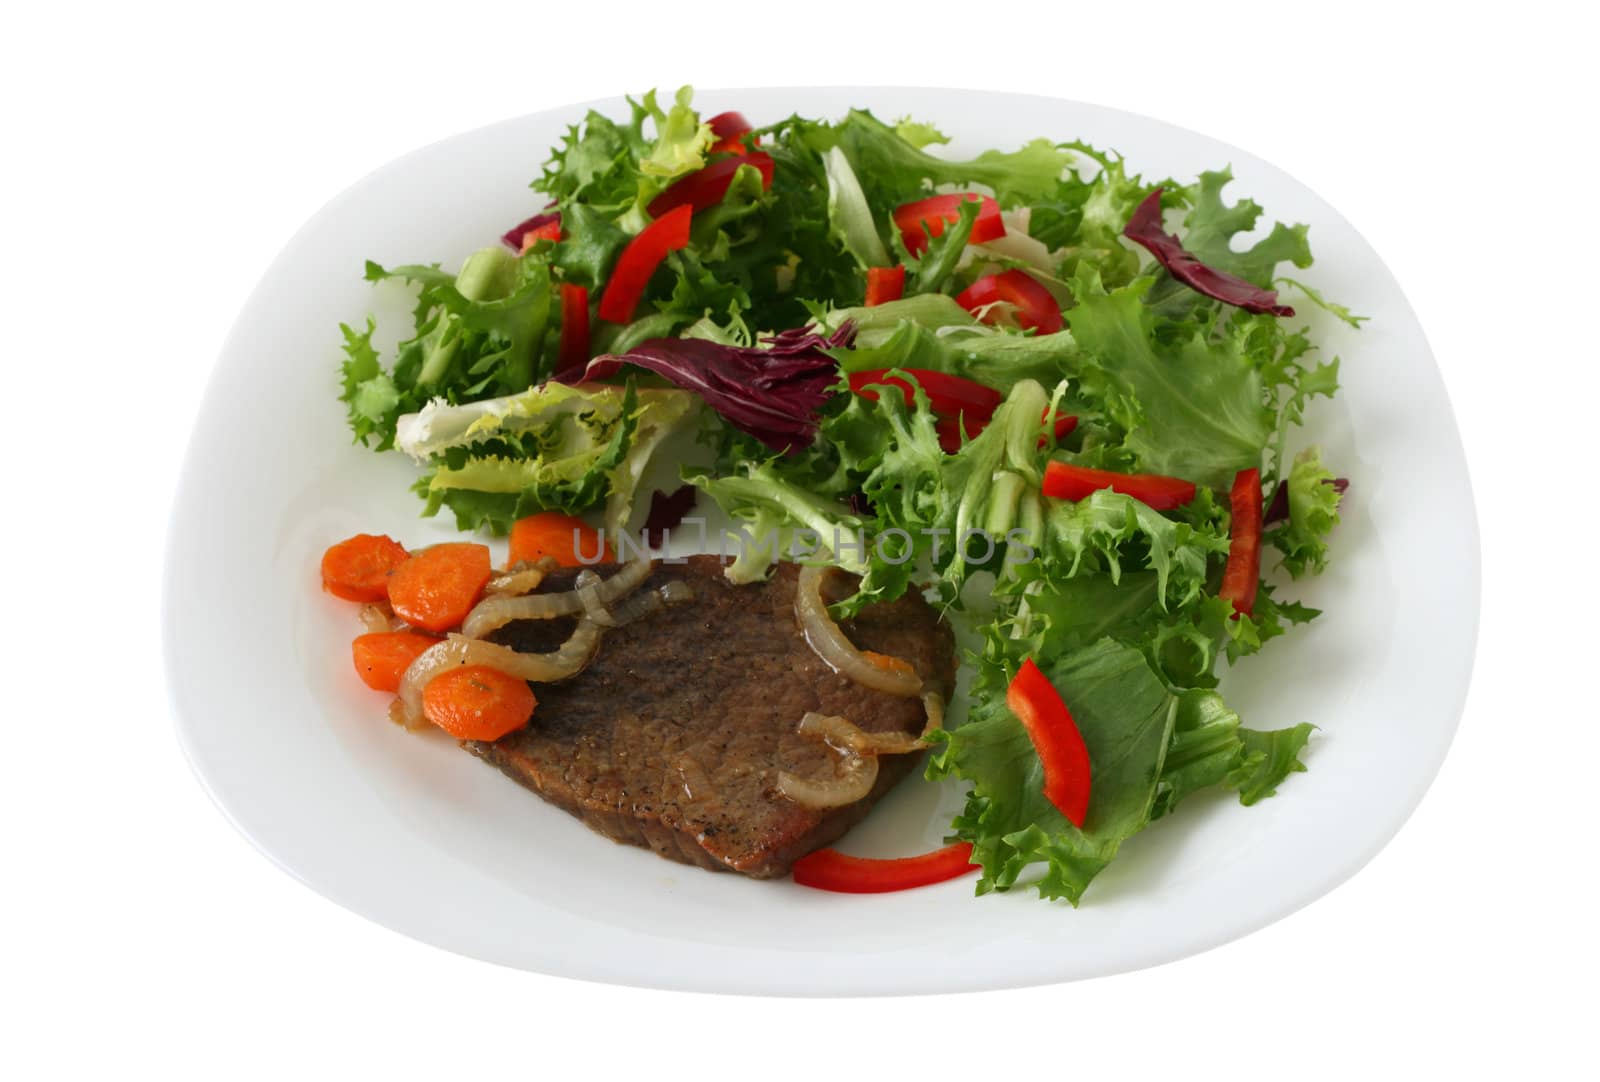 fried meat with salad